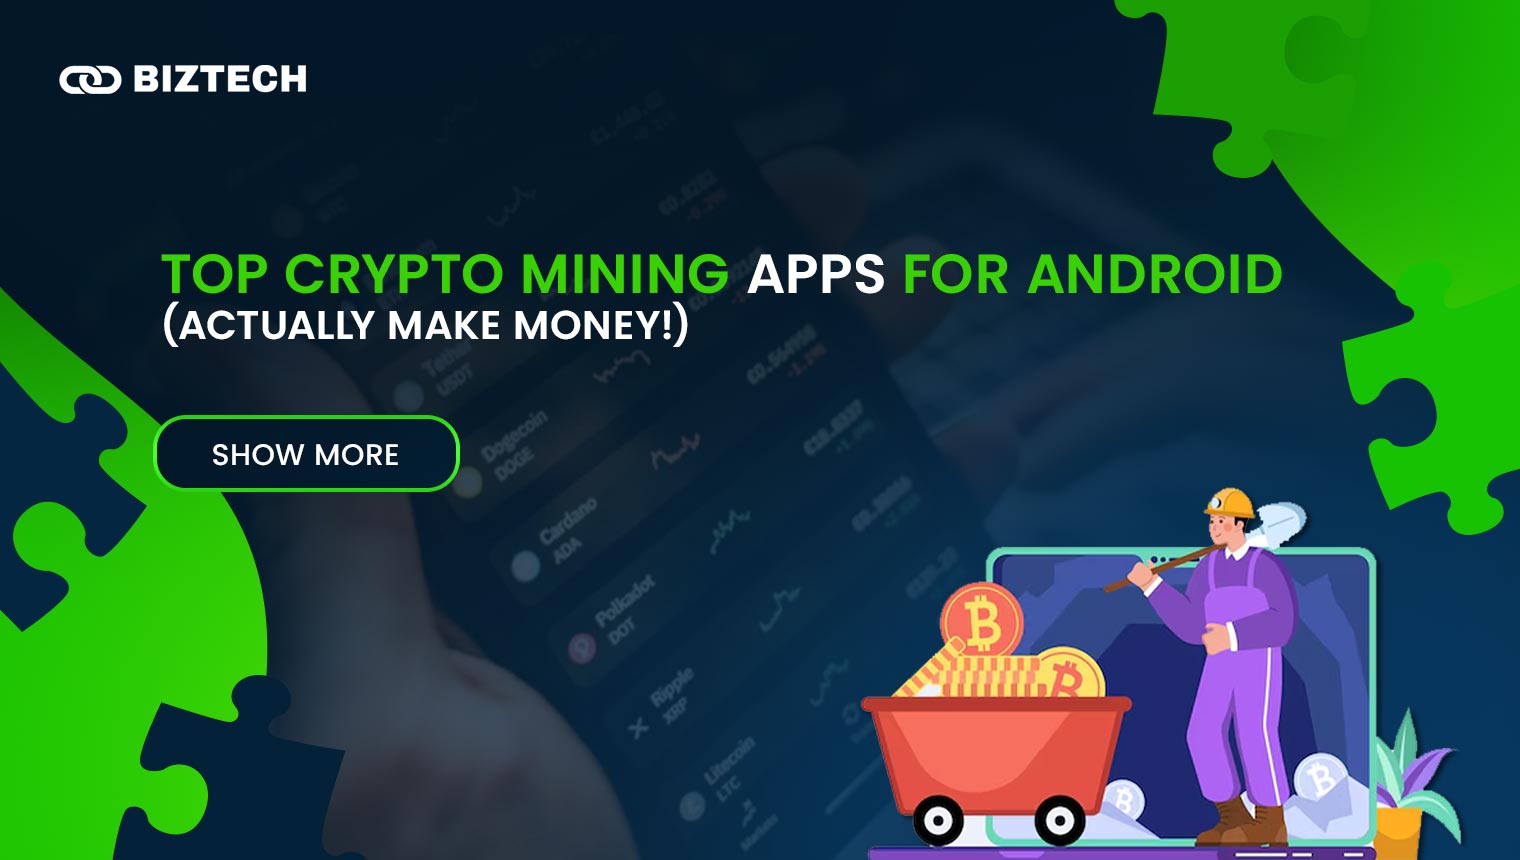 Top Crypto Mining Apps for Android (Actually Make Money!)